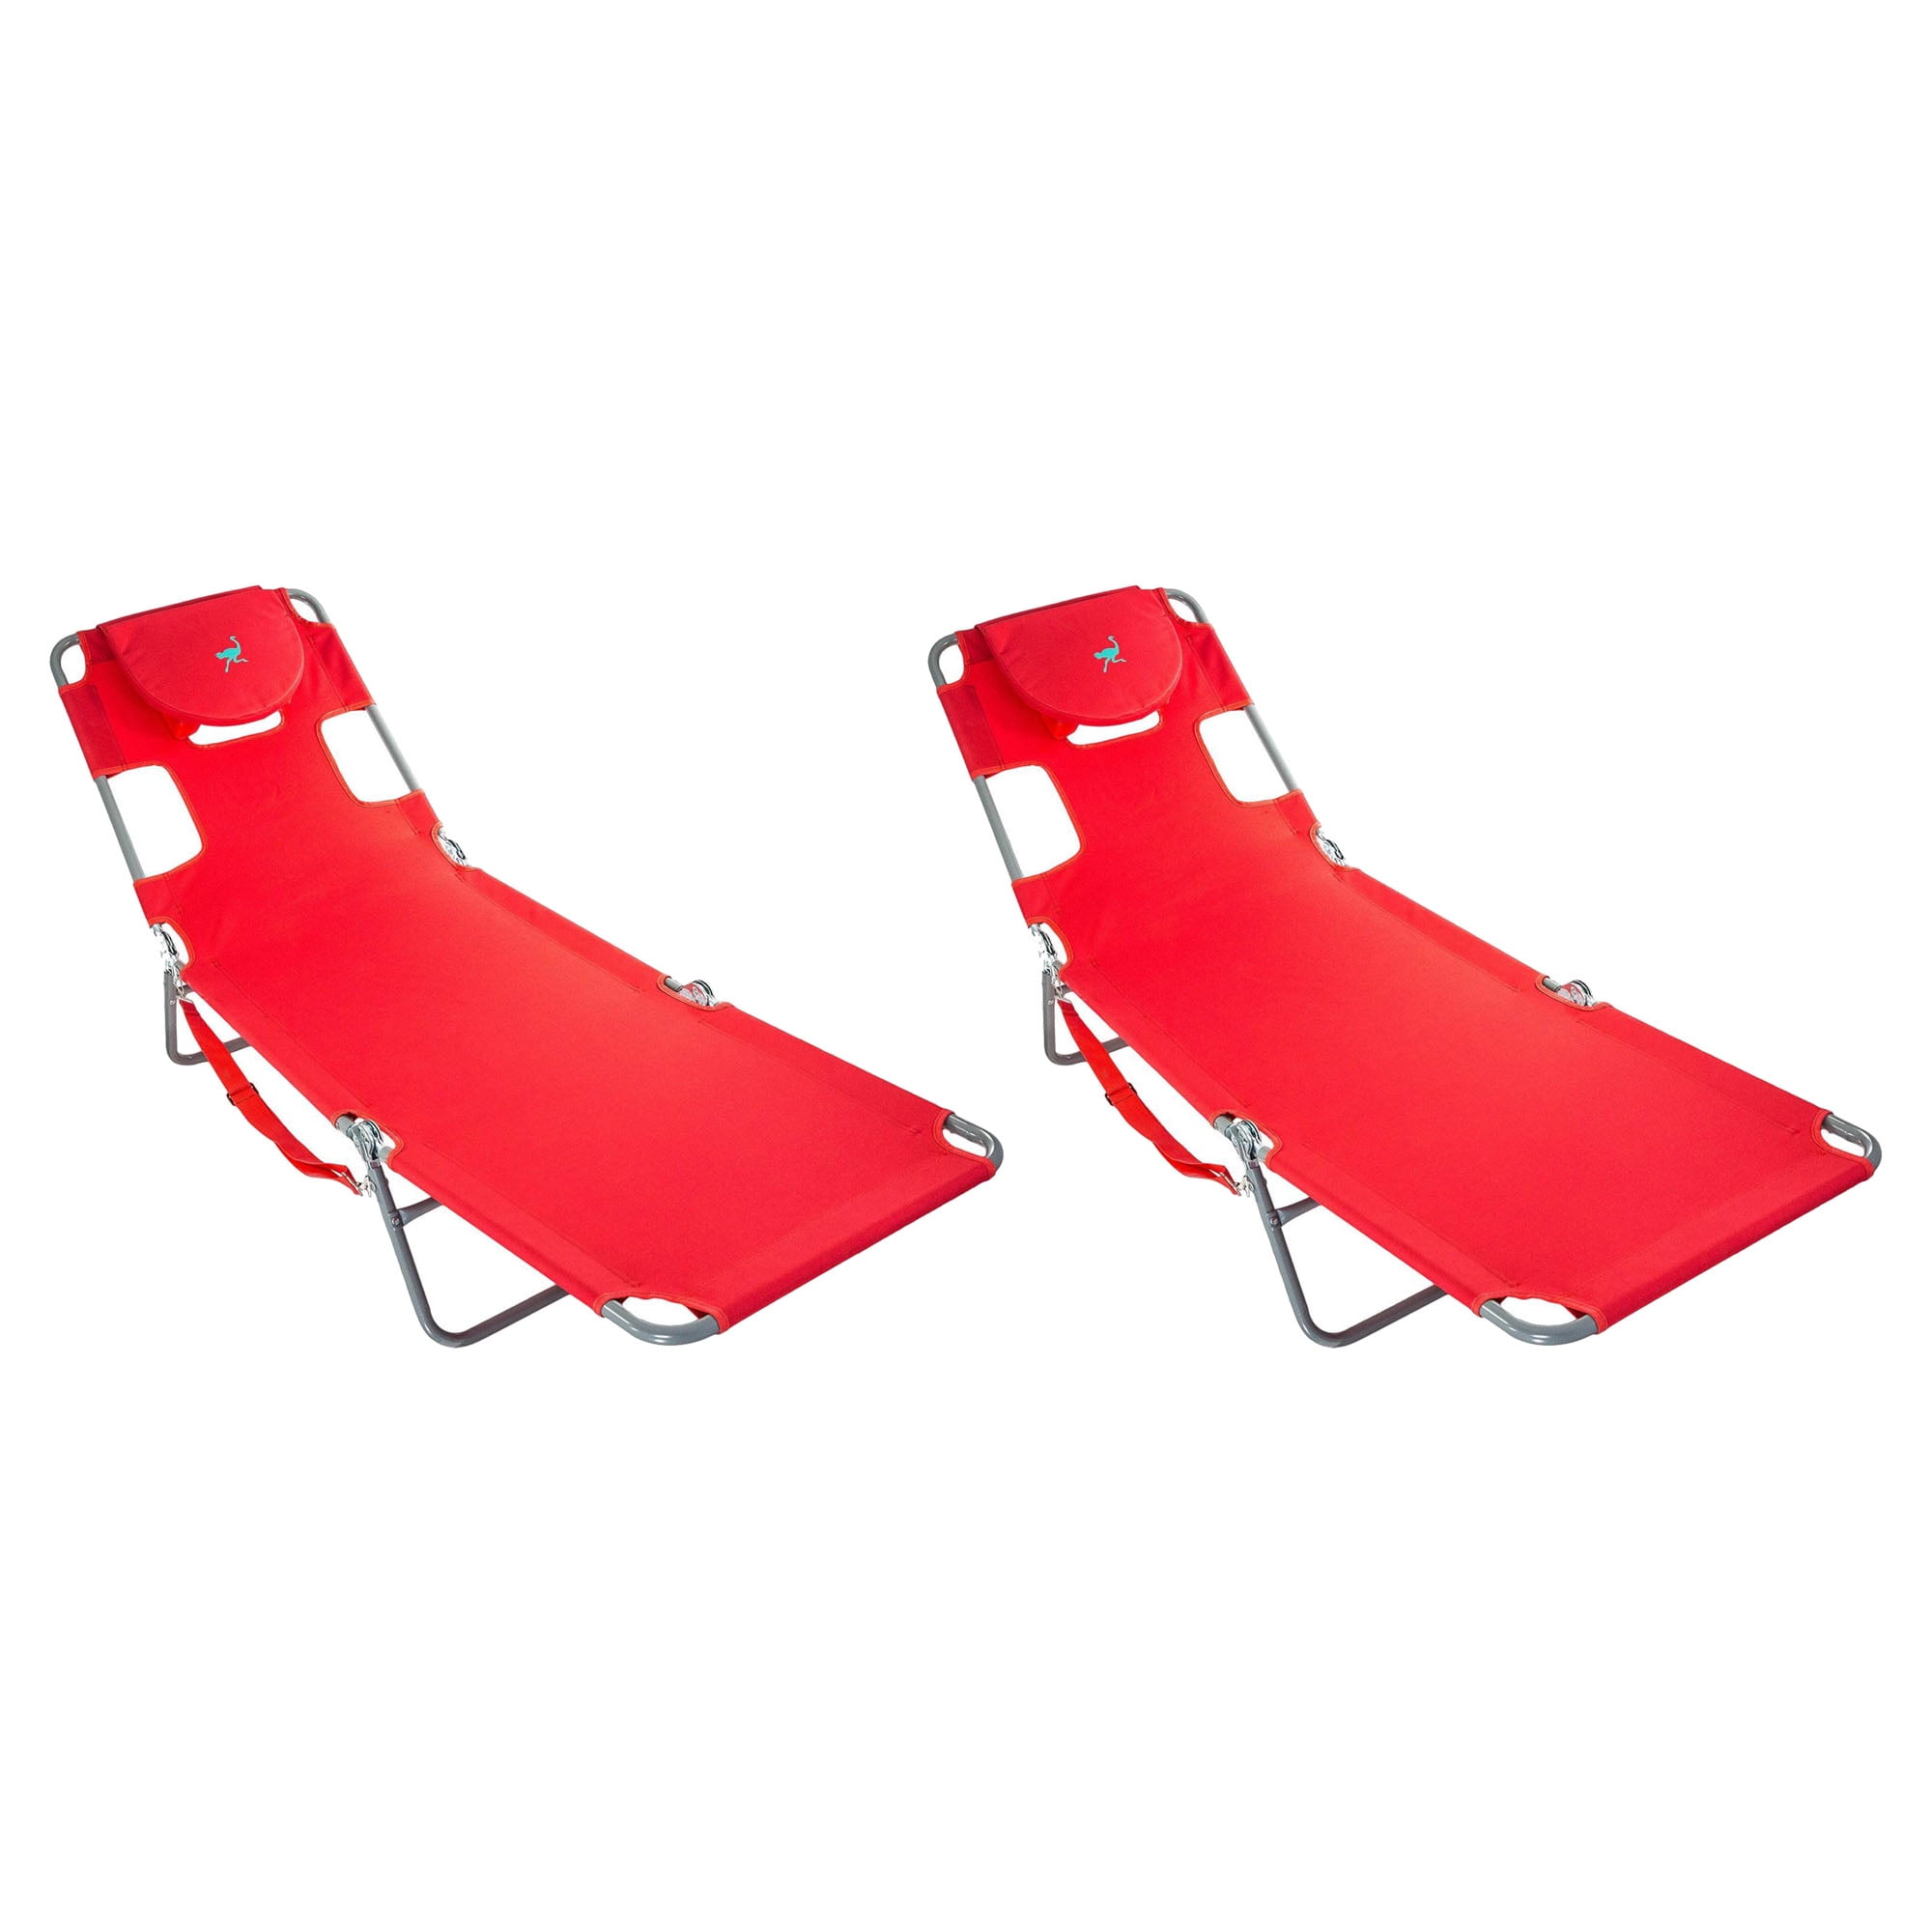 OSTRICH FACE DOWN CHAISE LOUNGER BEACH CHAIR WITH HANG strap NEW Red 